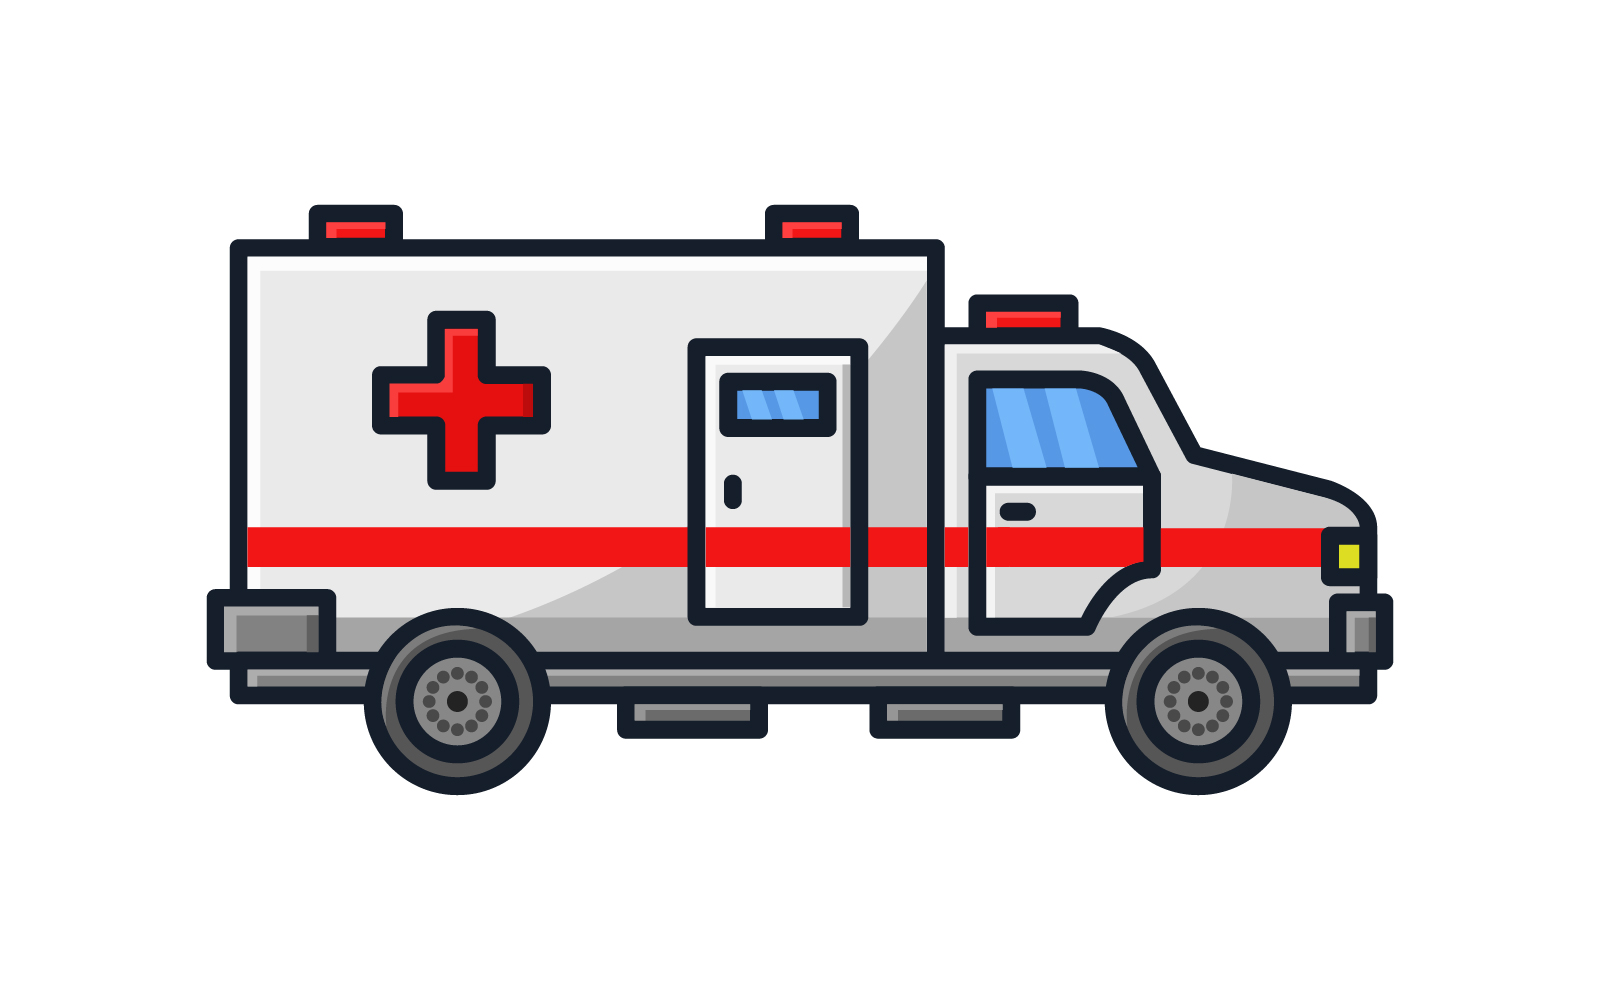 Ambulance illustrated in vector on background